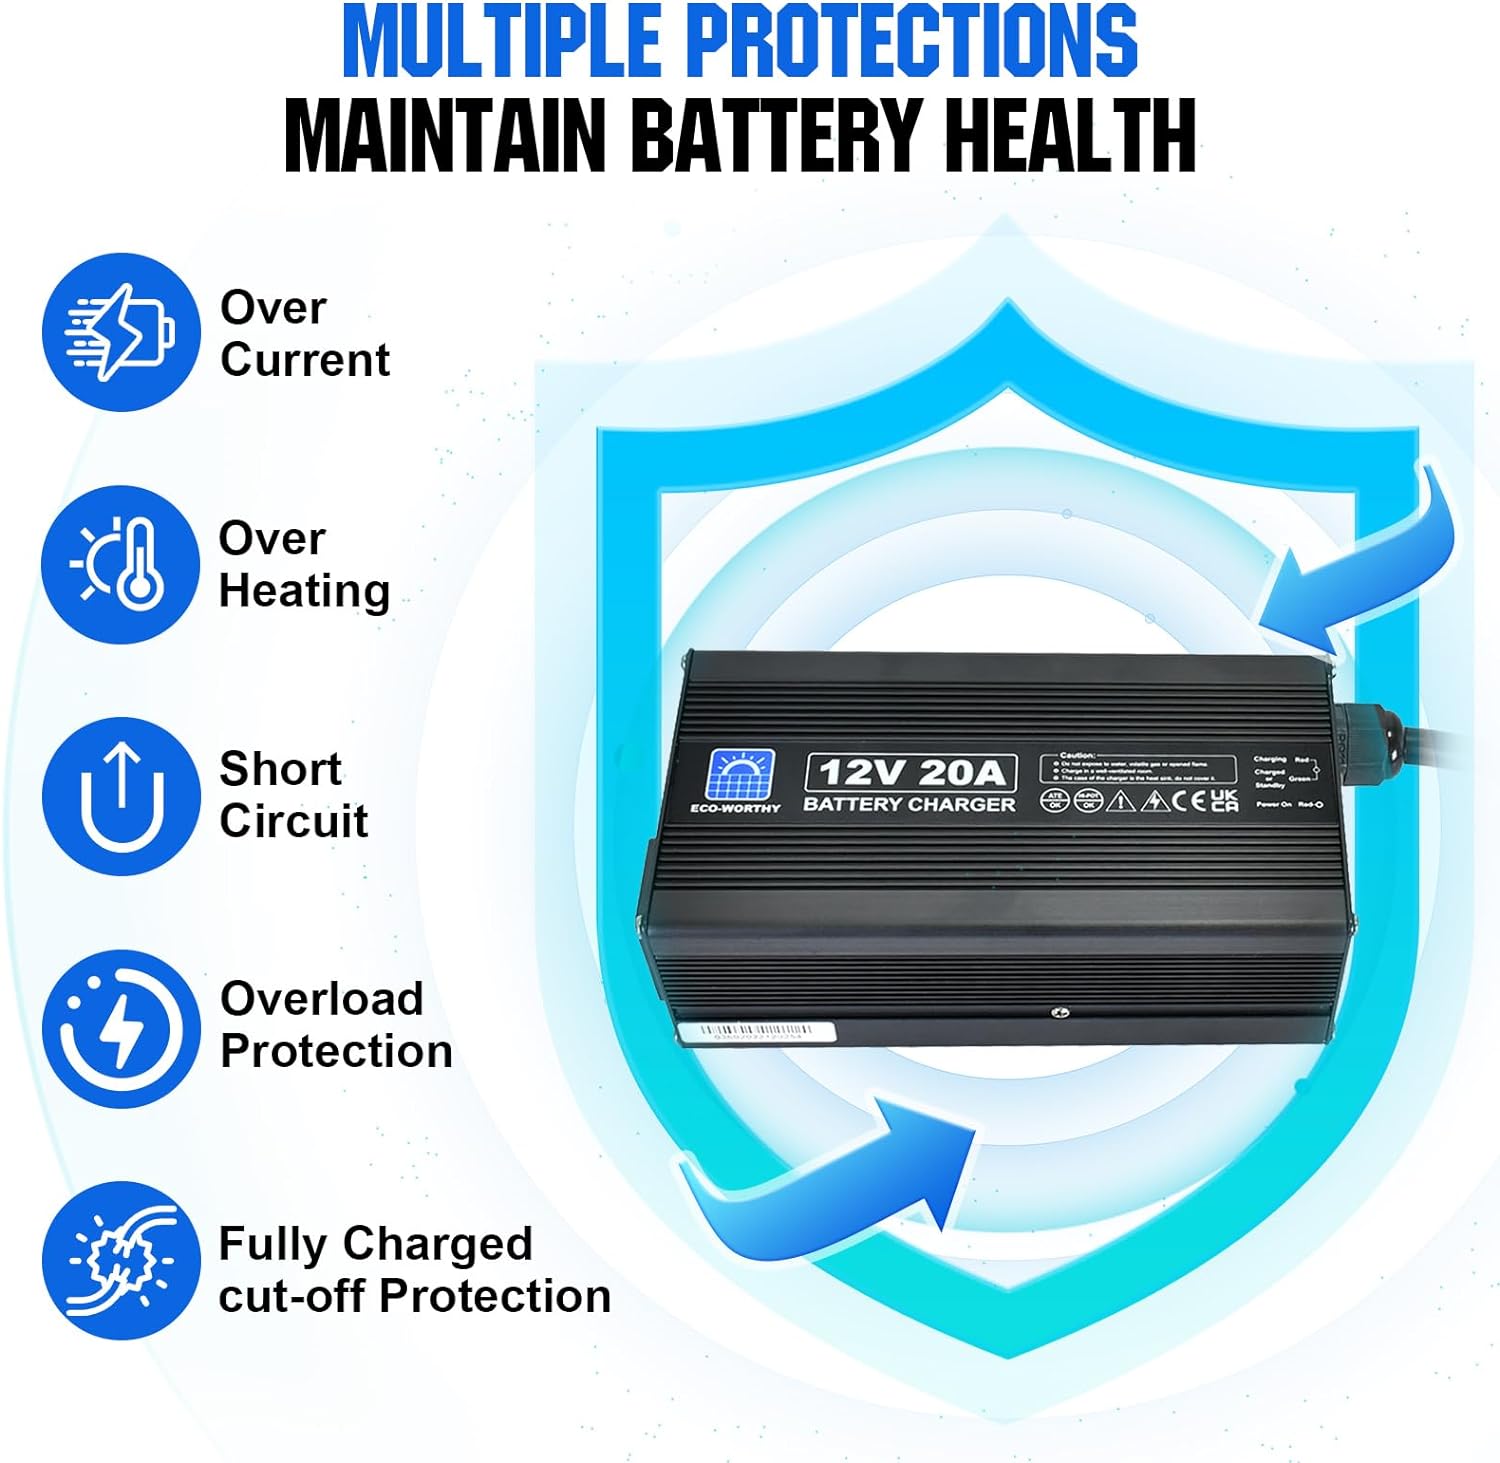 ECO-WORTHY 20A Battery Charger 12V Lithium LifePO4 Battery Charger 14.6V Automatic Smart  Maintenance for Deep Cycle Battery Car Motorcycle Marine - ECO-WORTHY 20A Battery Charger 12V Lithium LifePO4 Battery Charger Review